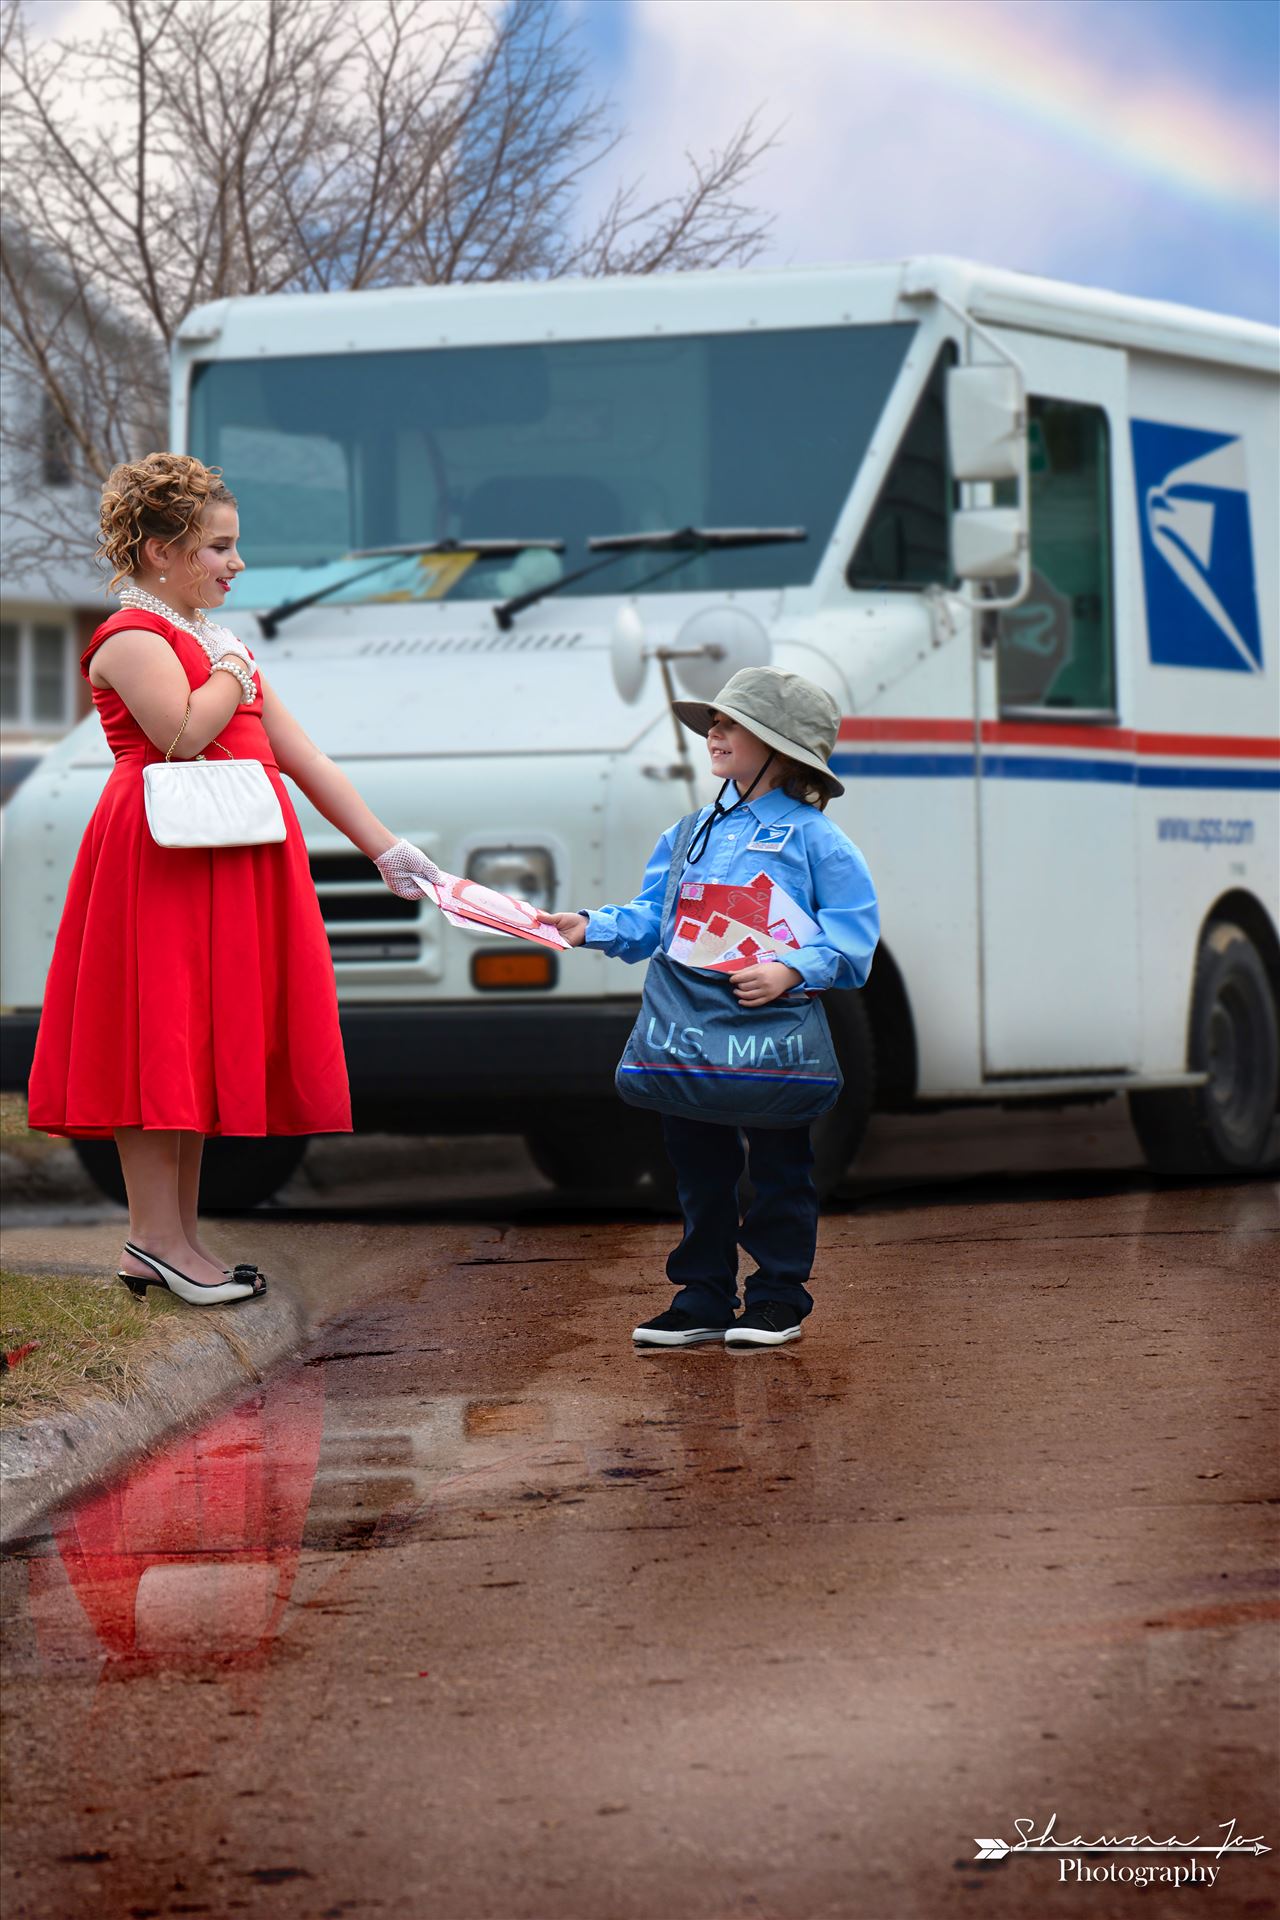 postman-1editWATERMARK.jpg special delivery! You've got mail by Shawna Jo Photography